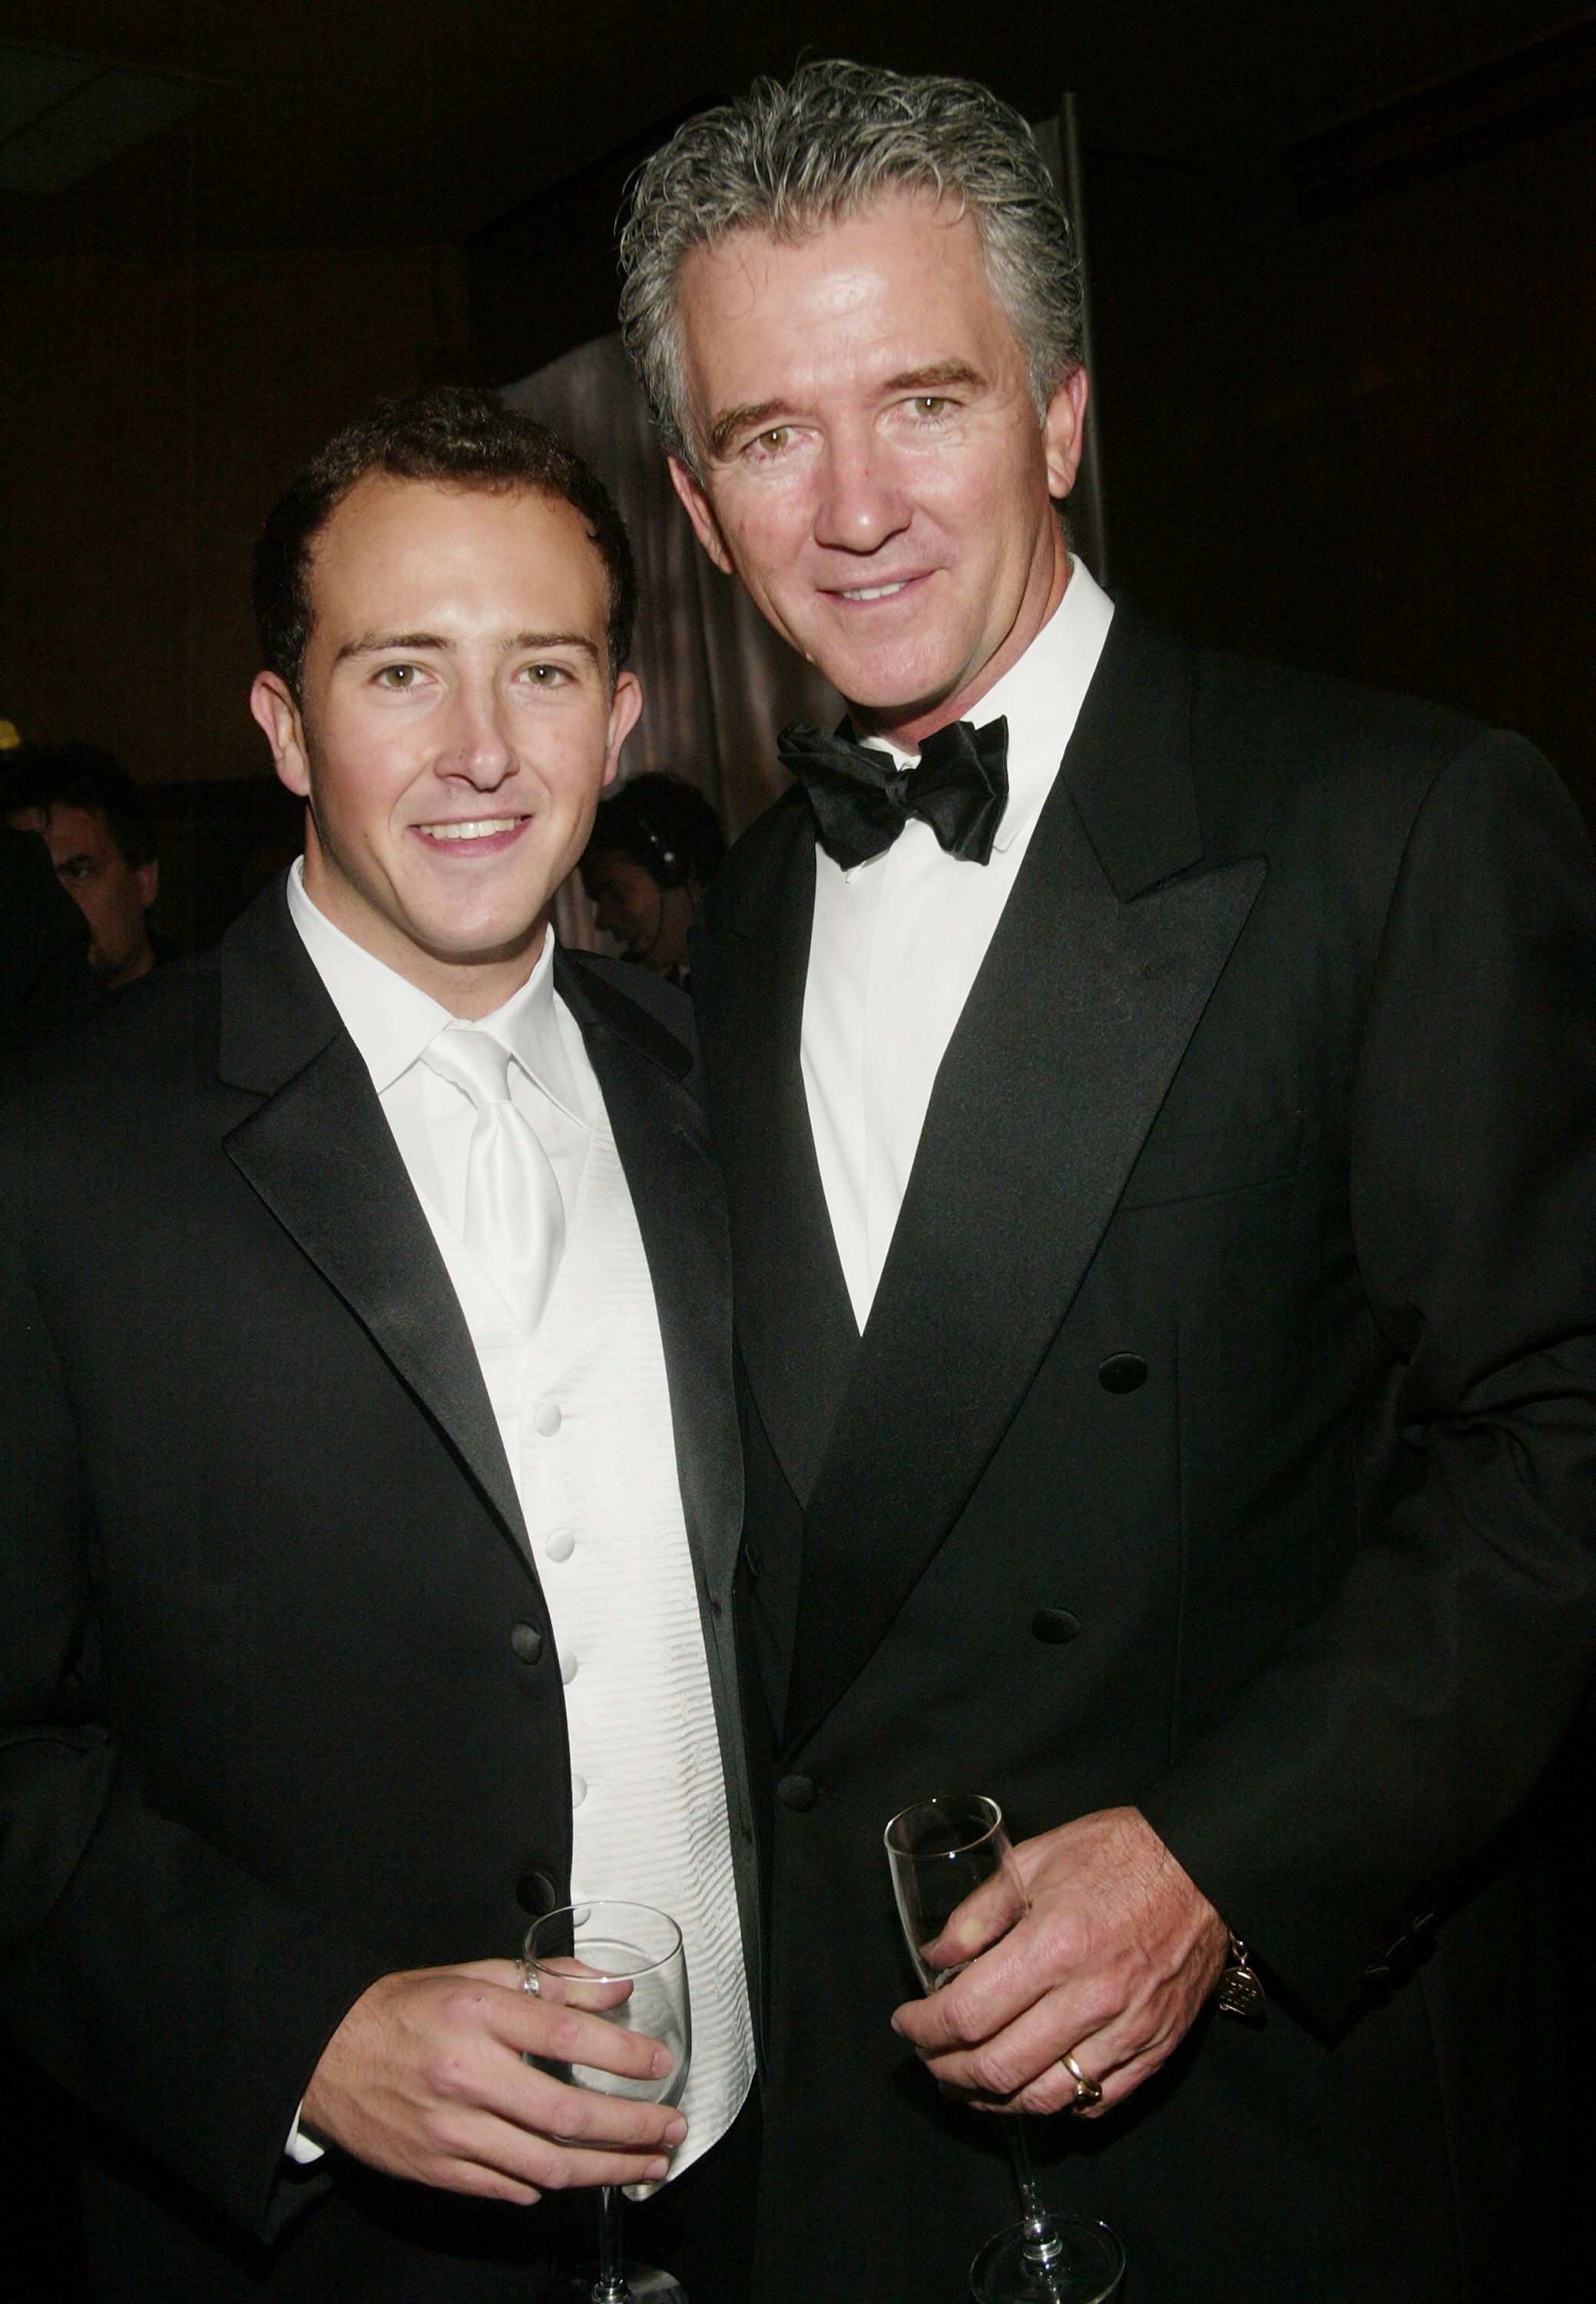 Actor Patrick Duffy and son, Conor Duffy attending a party on November 2, 2003 in New York City. | Photo: Getty Images